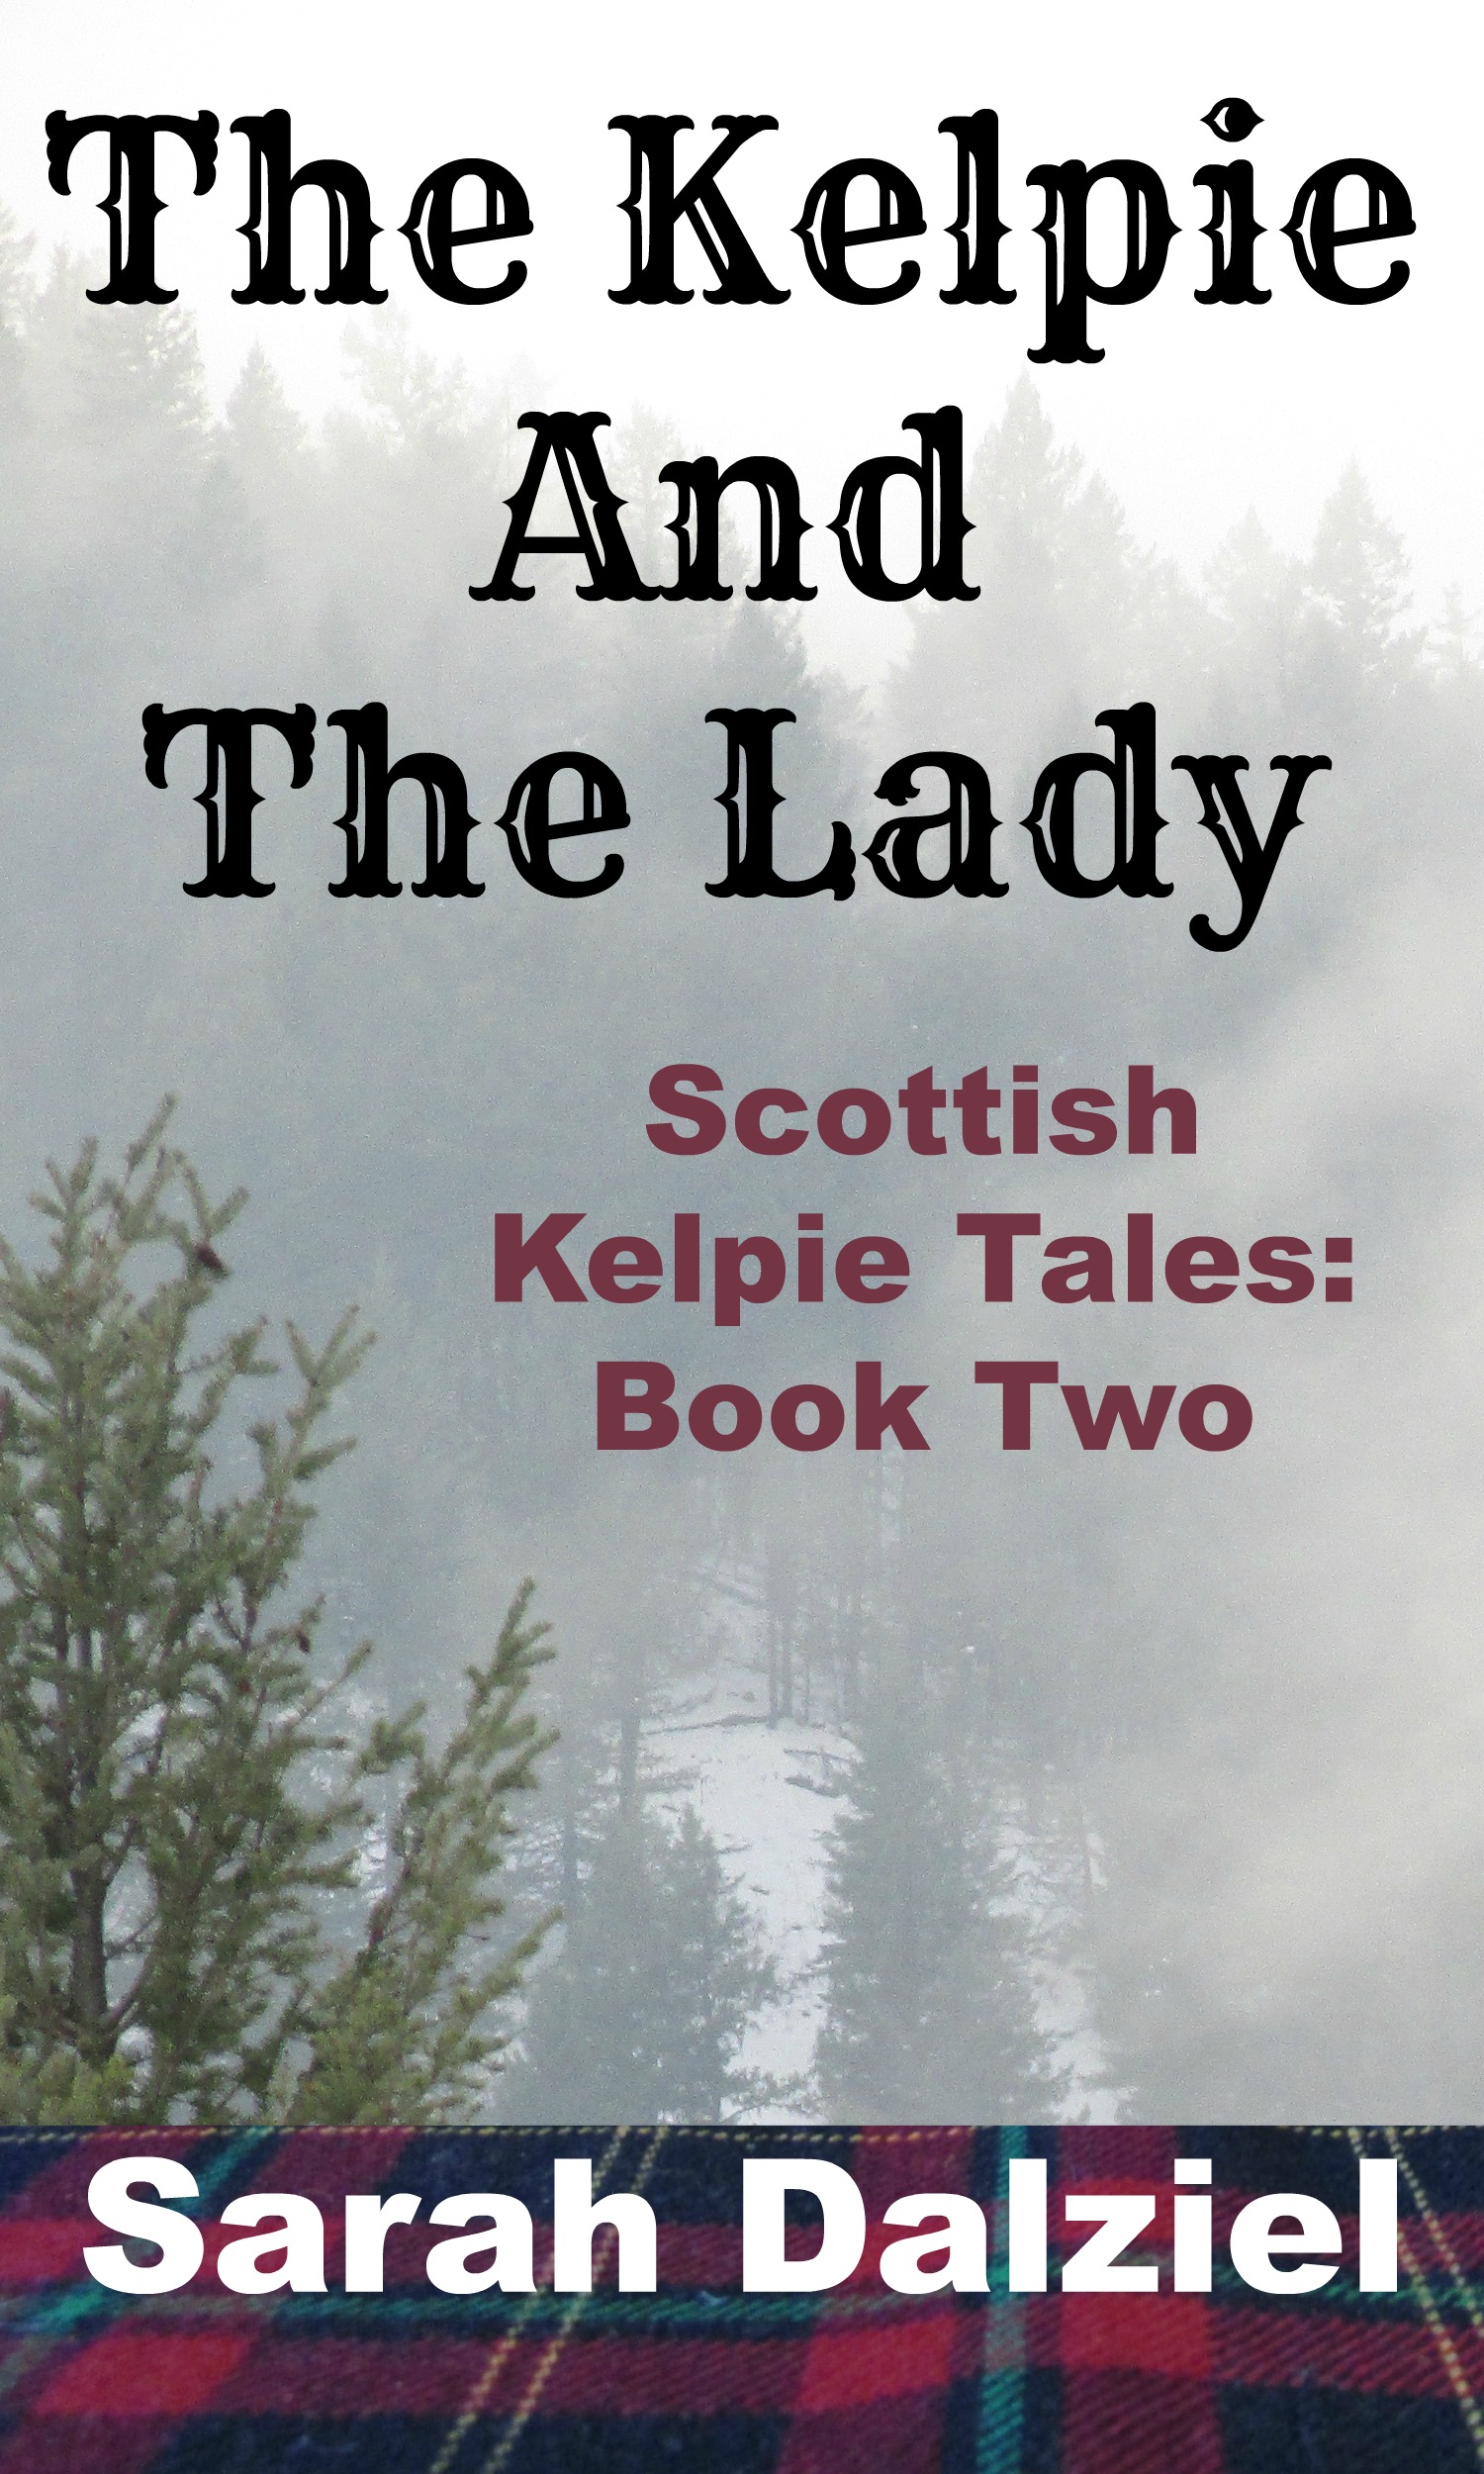 The Kelpie And The Lady Book Cover 1 Sarah Dalziel Media 